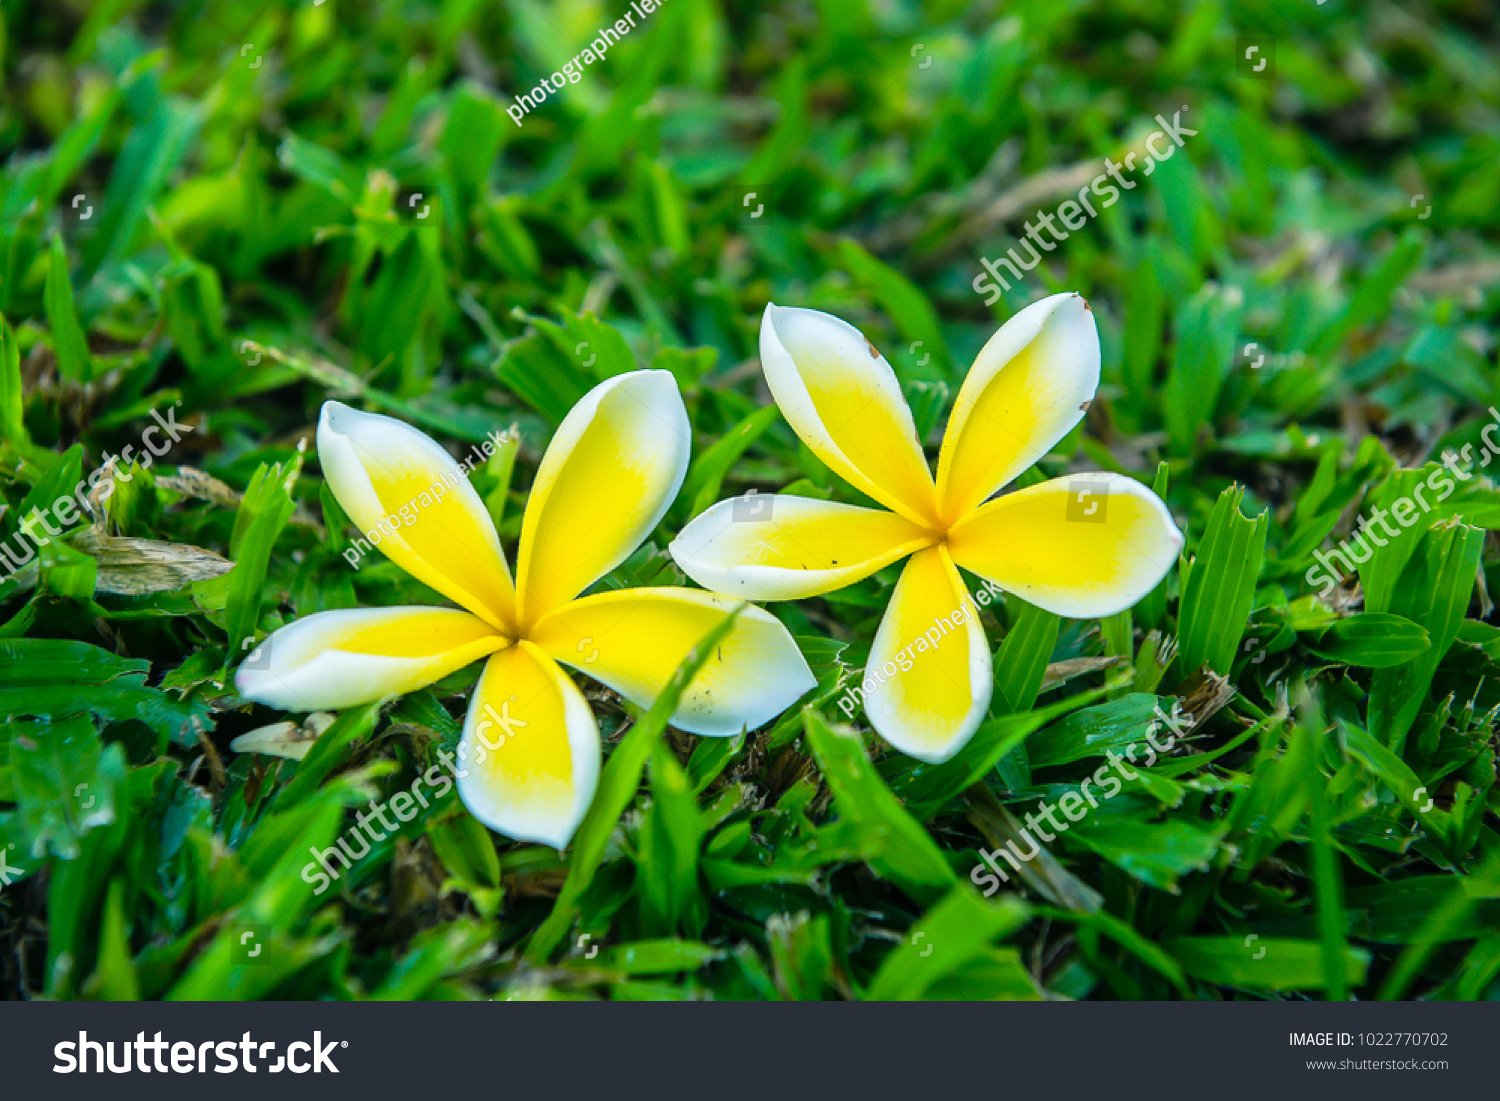 Natural white and pink frangipani or plumeria flower on tree and grass background #1022770702